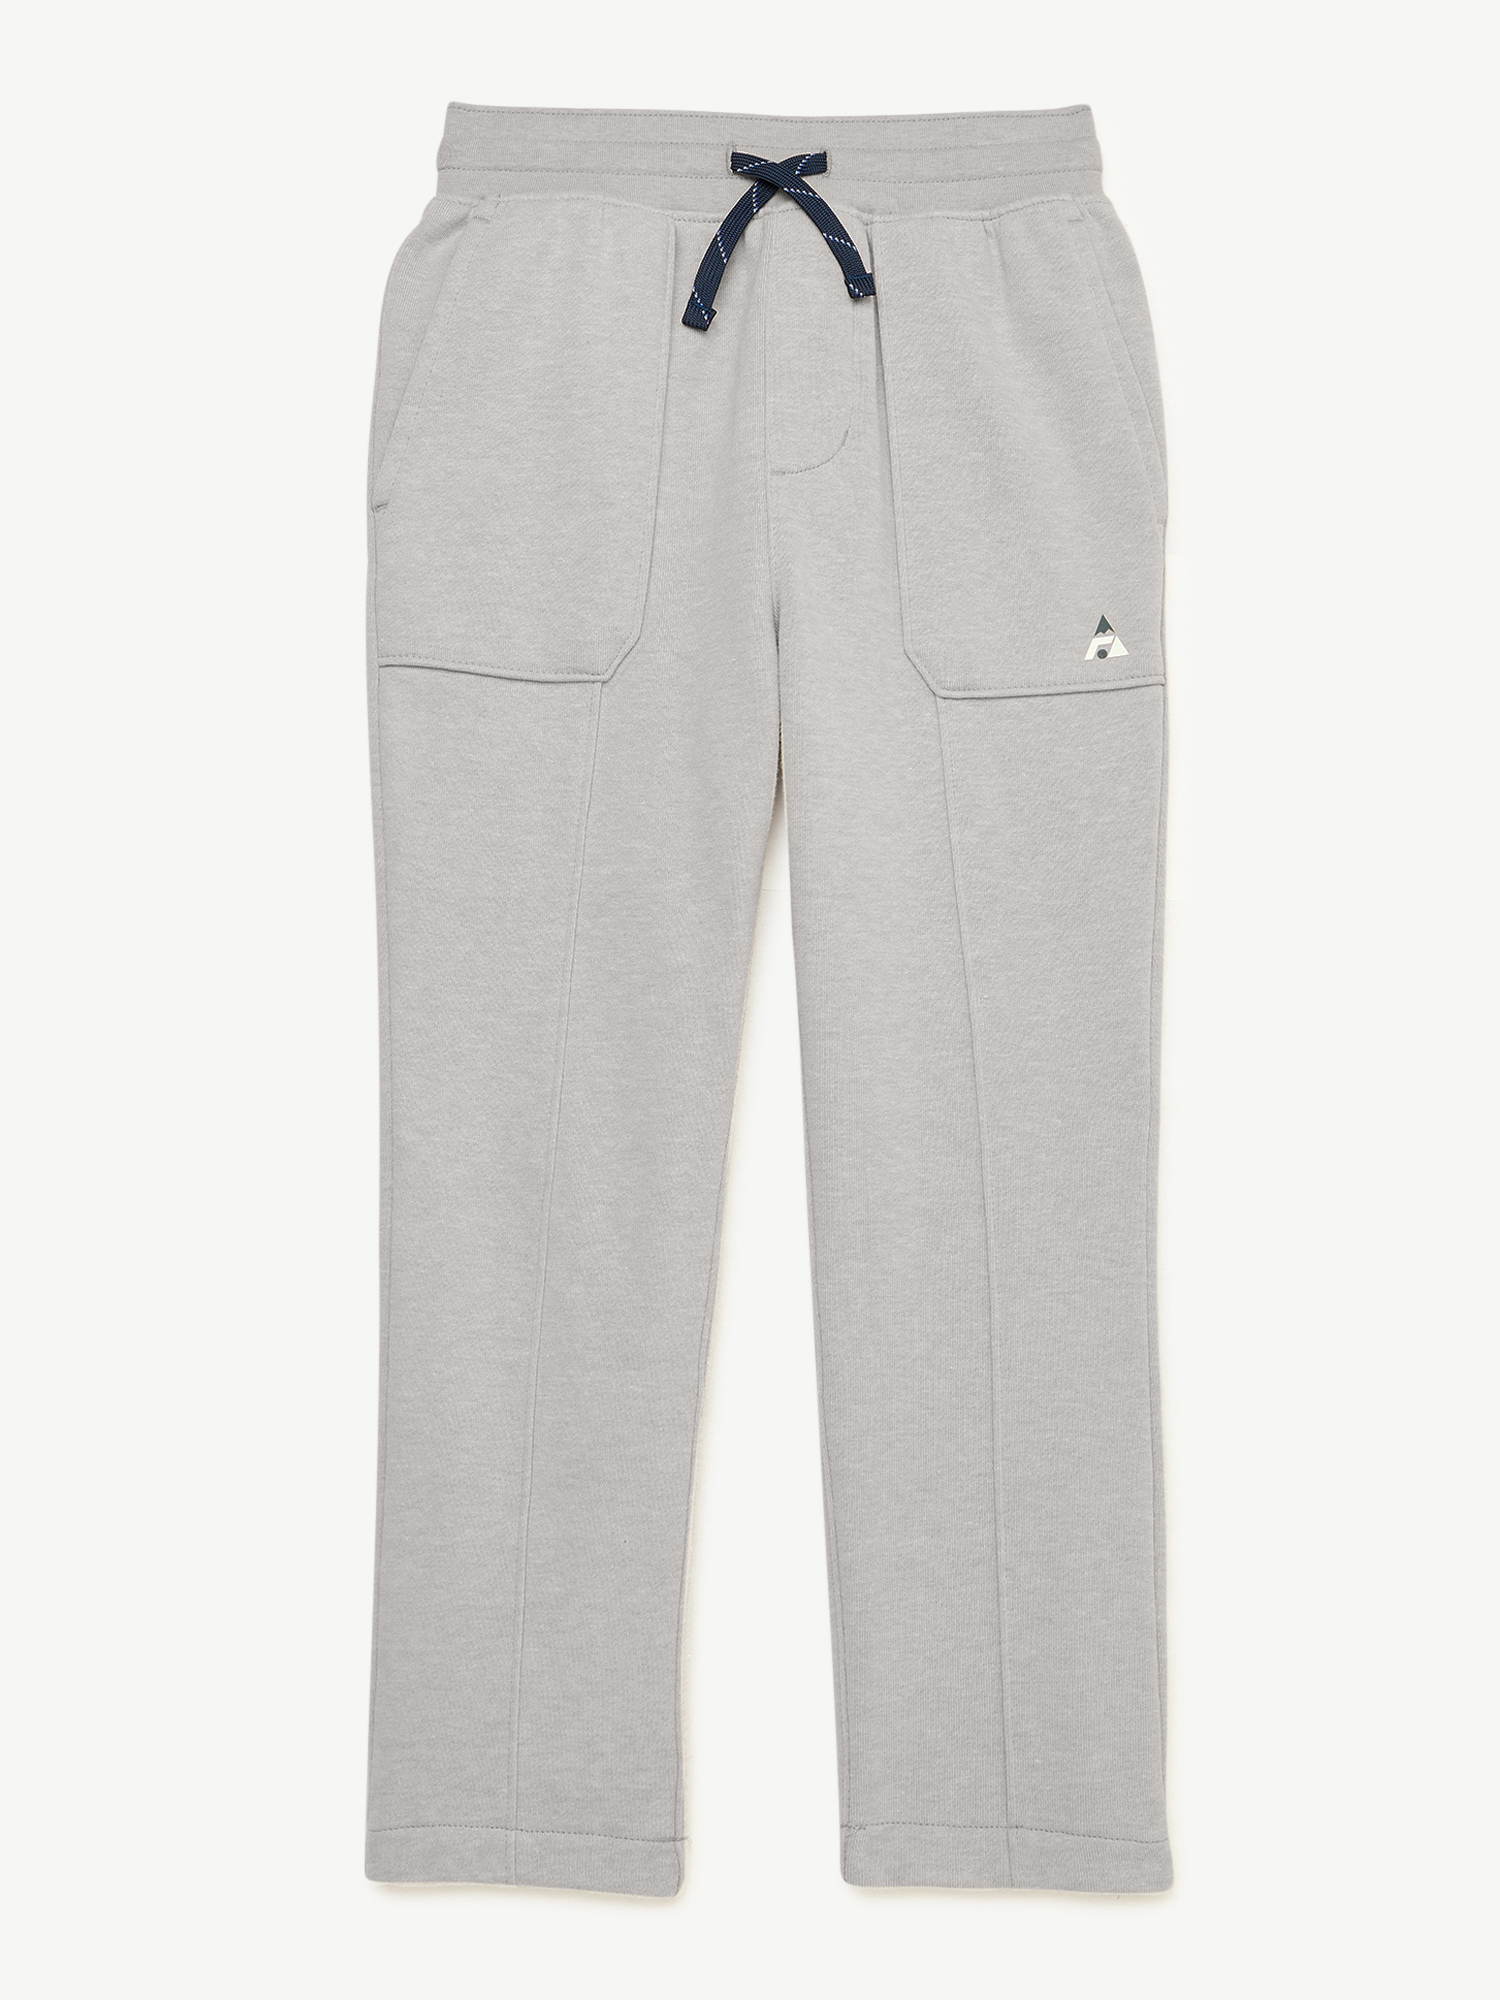 Free Assembly Boys Fleece Fatigue Pants, Sizes 4-18 - image 4 of 5